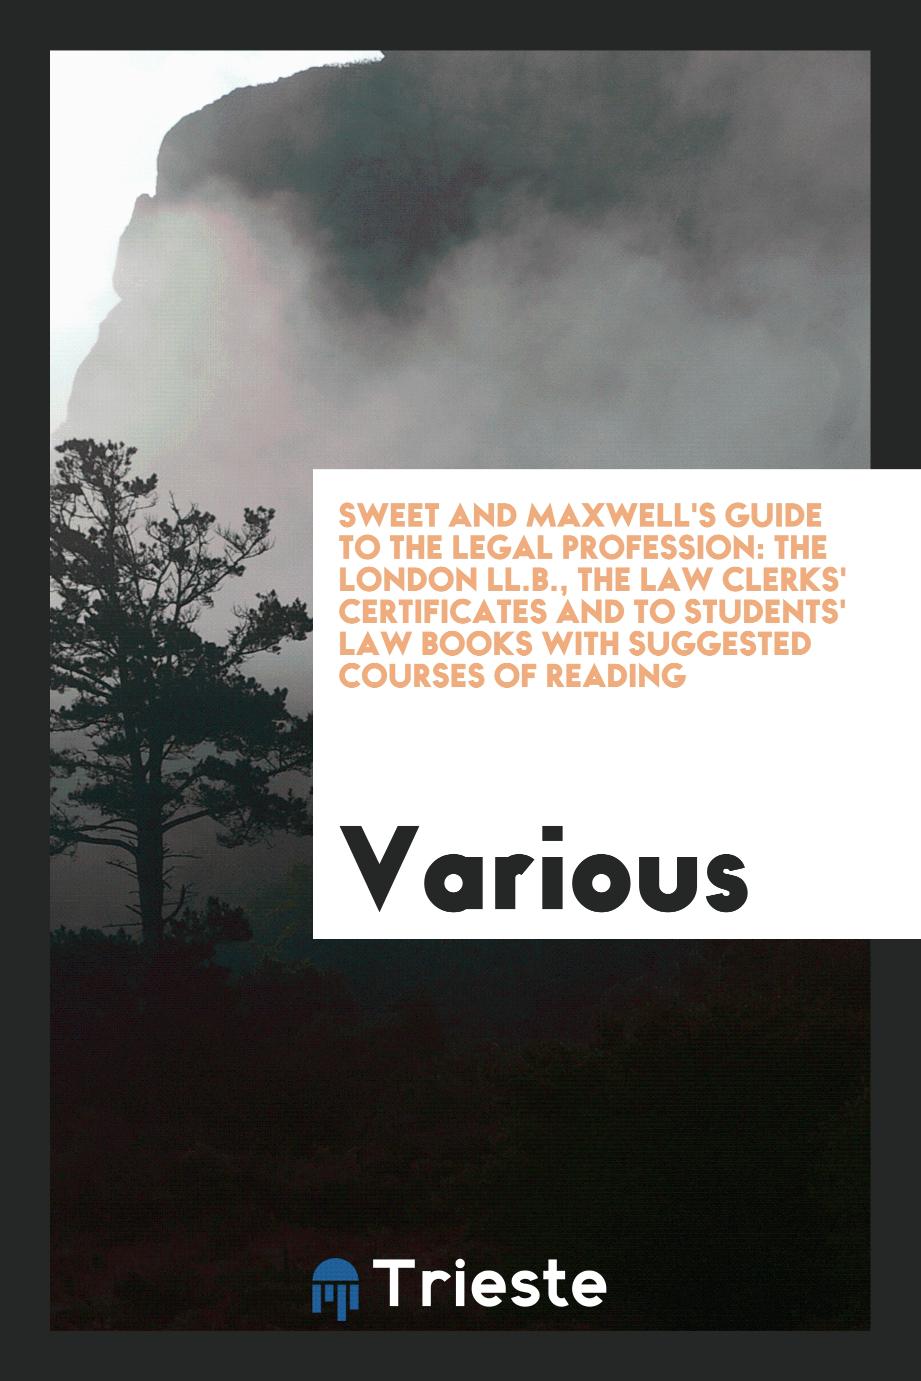 Sweet and Maxwell's Guide to the Legal Profession: The London LL.B., the Law Clerks' Certificates and to Students' Law Books with Suggested Courses of Reading